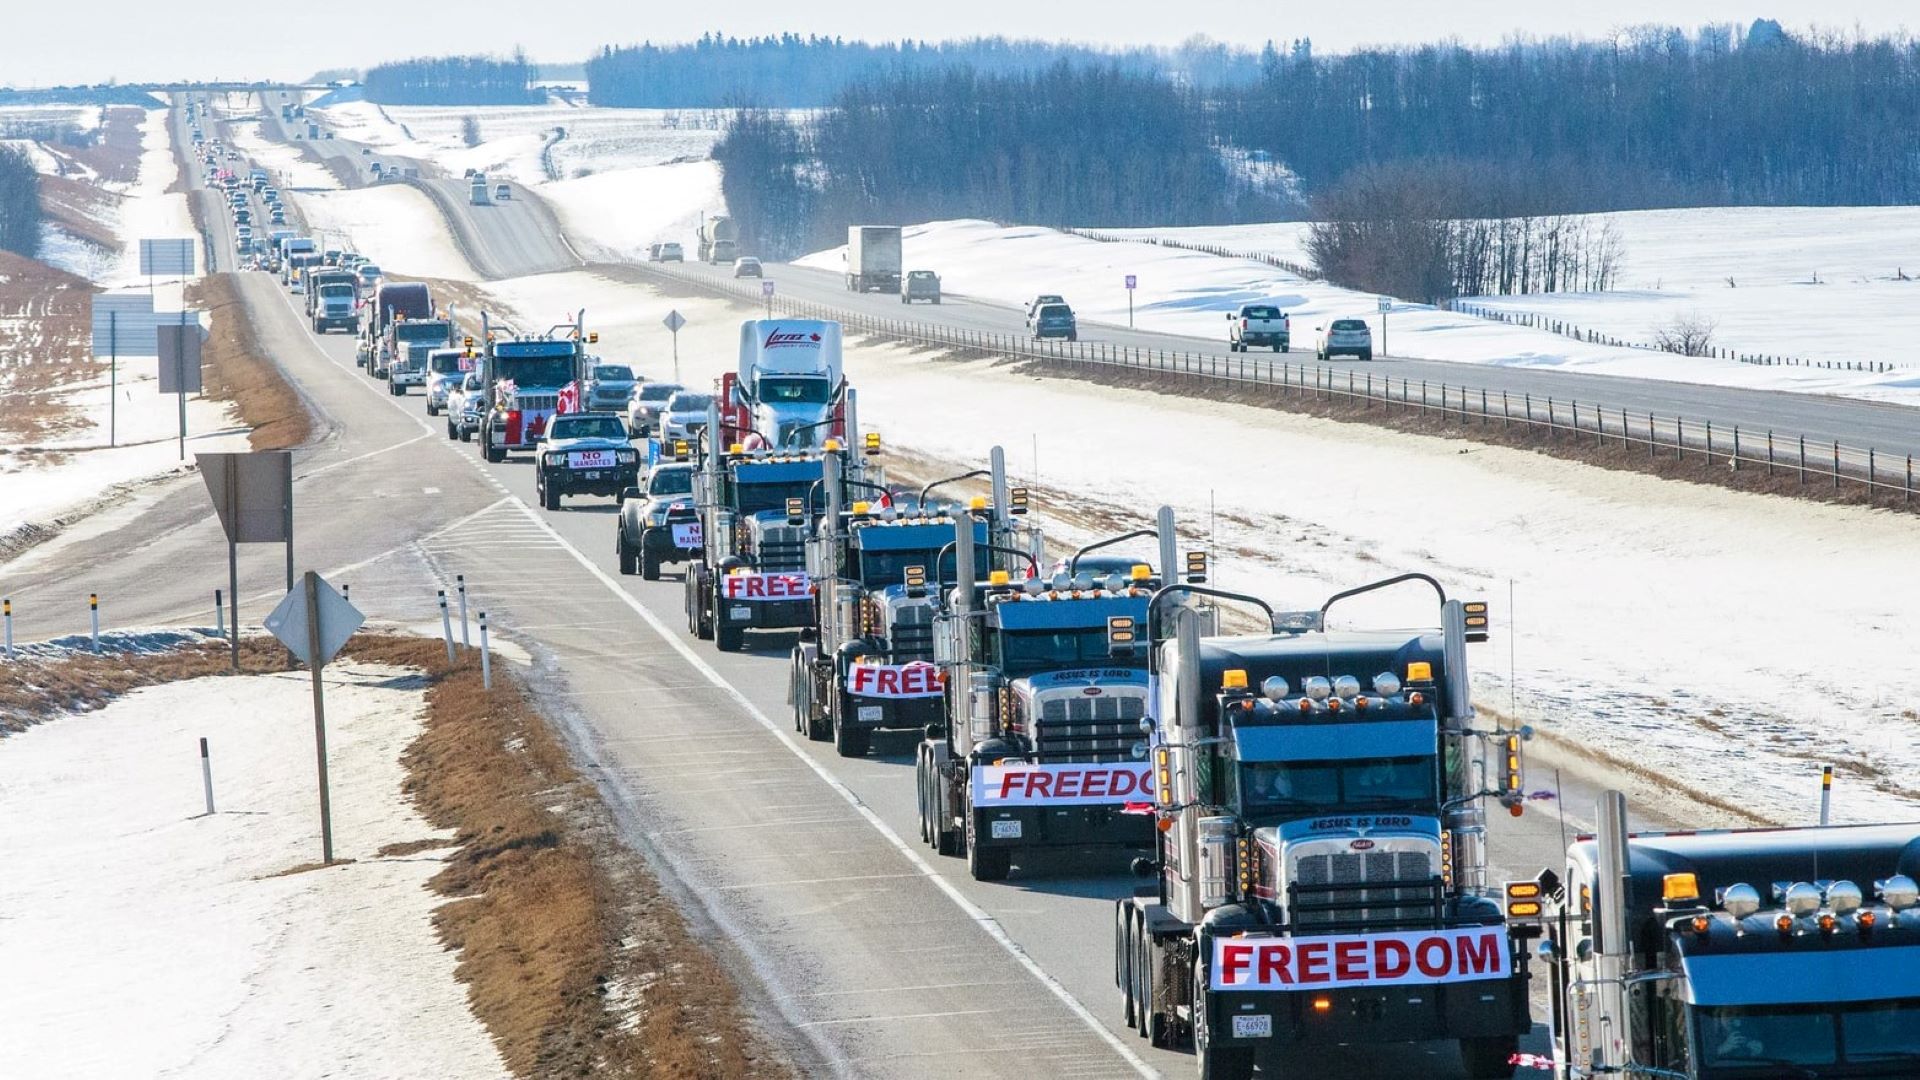 In response to the Freedom Convoy, Justin Tudeau’s government has invoked new powers with extremely serious implications.